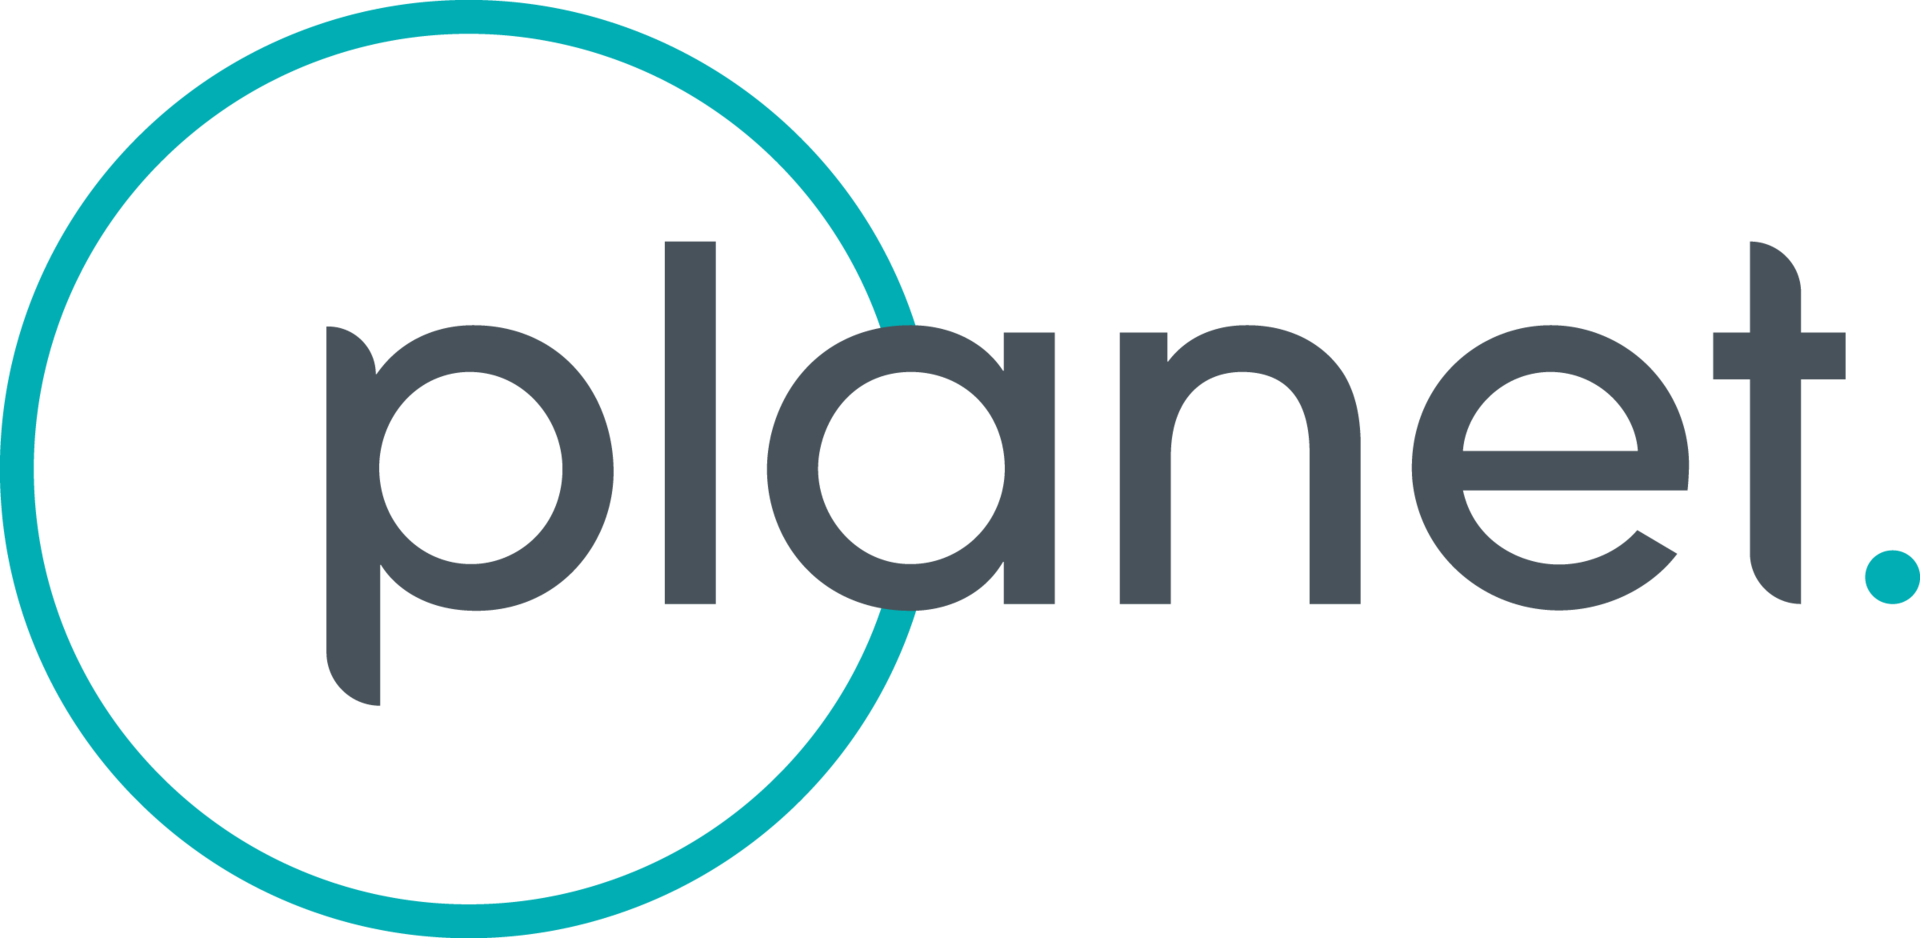 1920px-Planet_logo_New.png